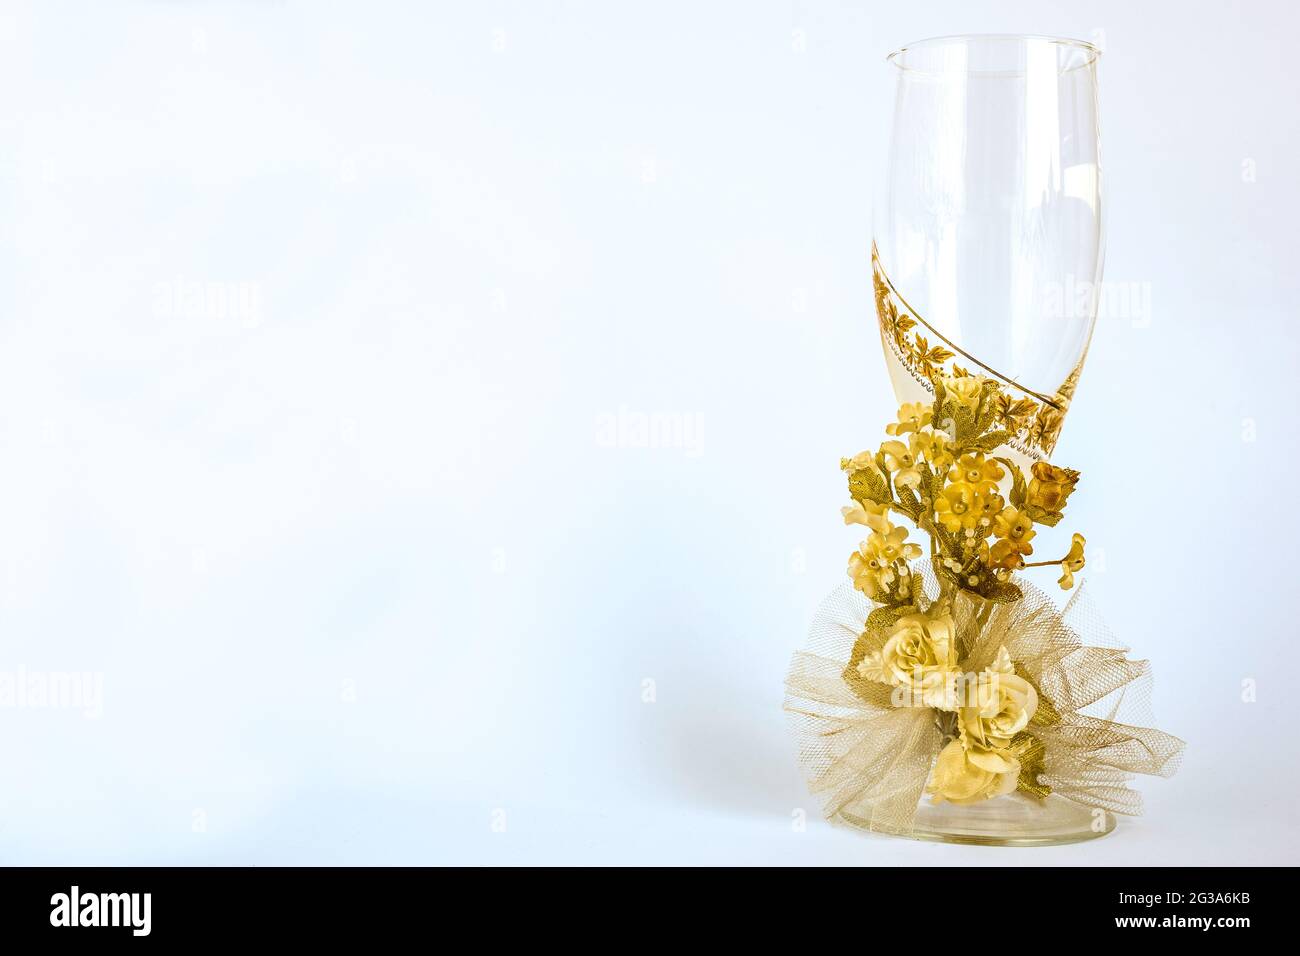 Empty champagne glass in a festive orange arrangement of flowers on a white background Stock Photo